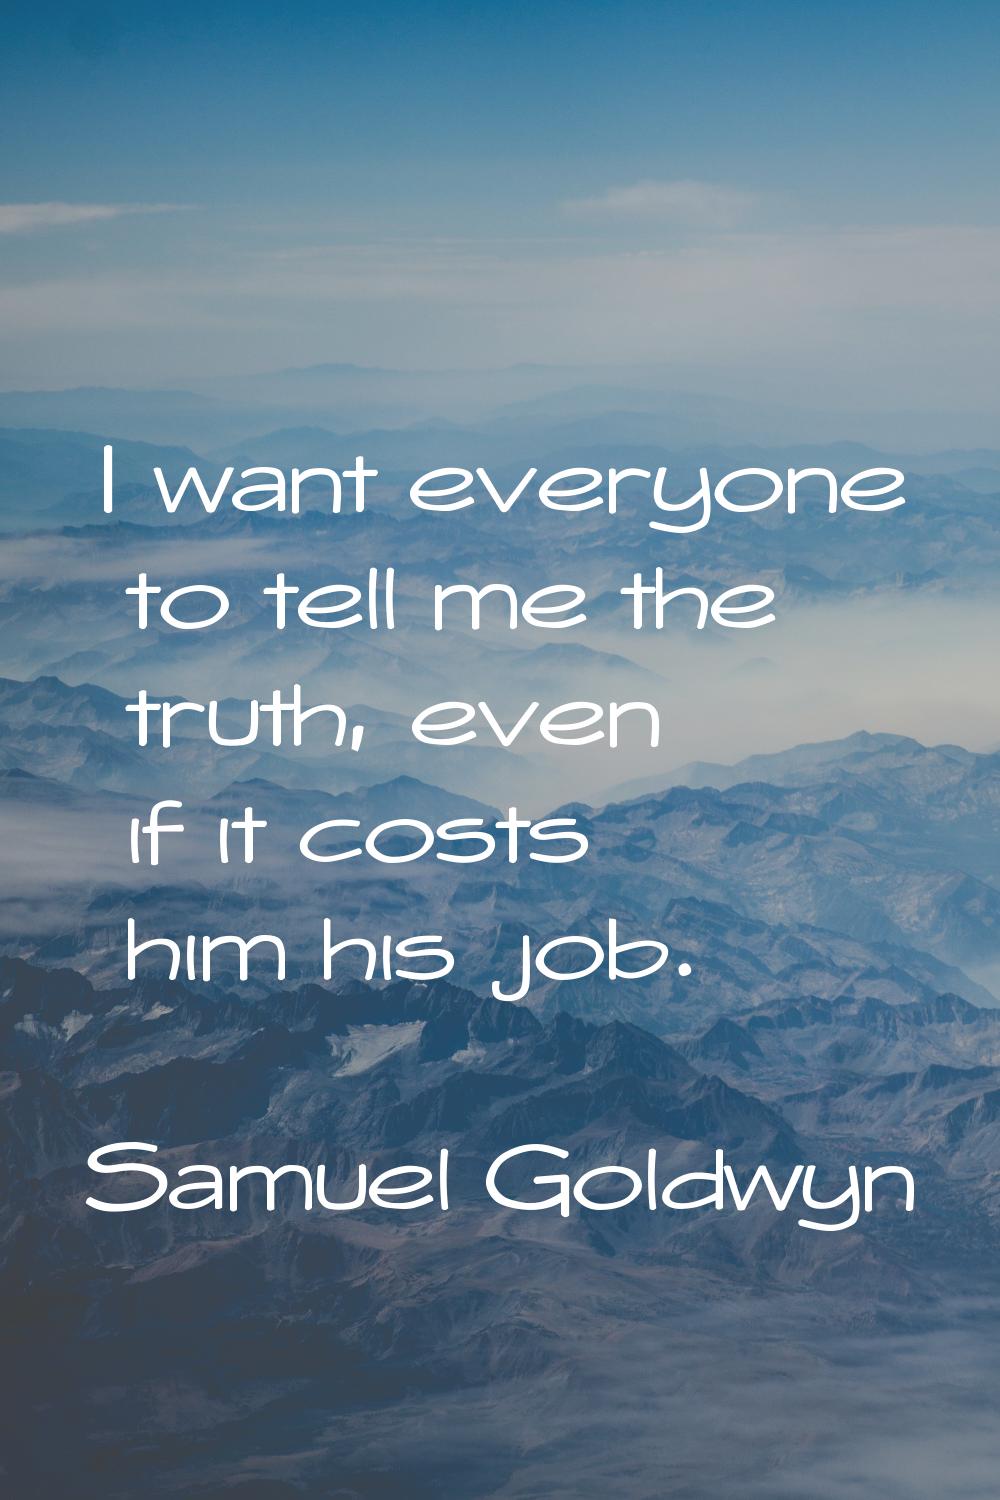 I want everyone to tell me the truth, even if it costs him his job.